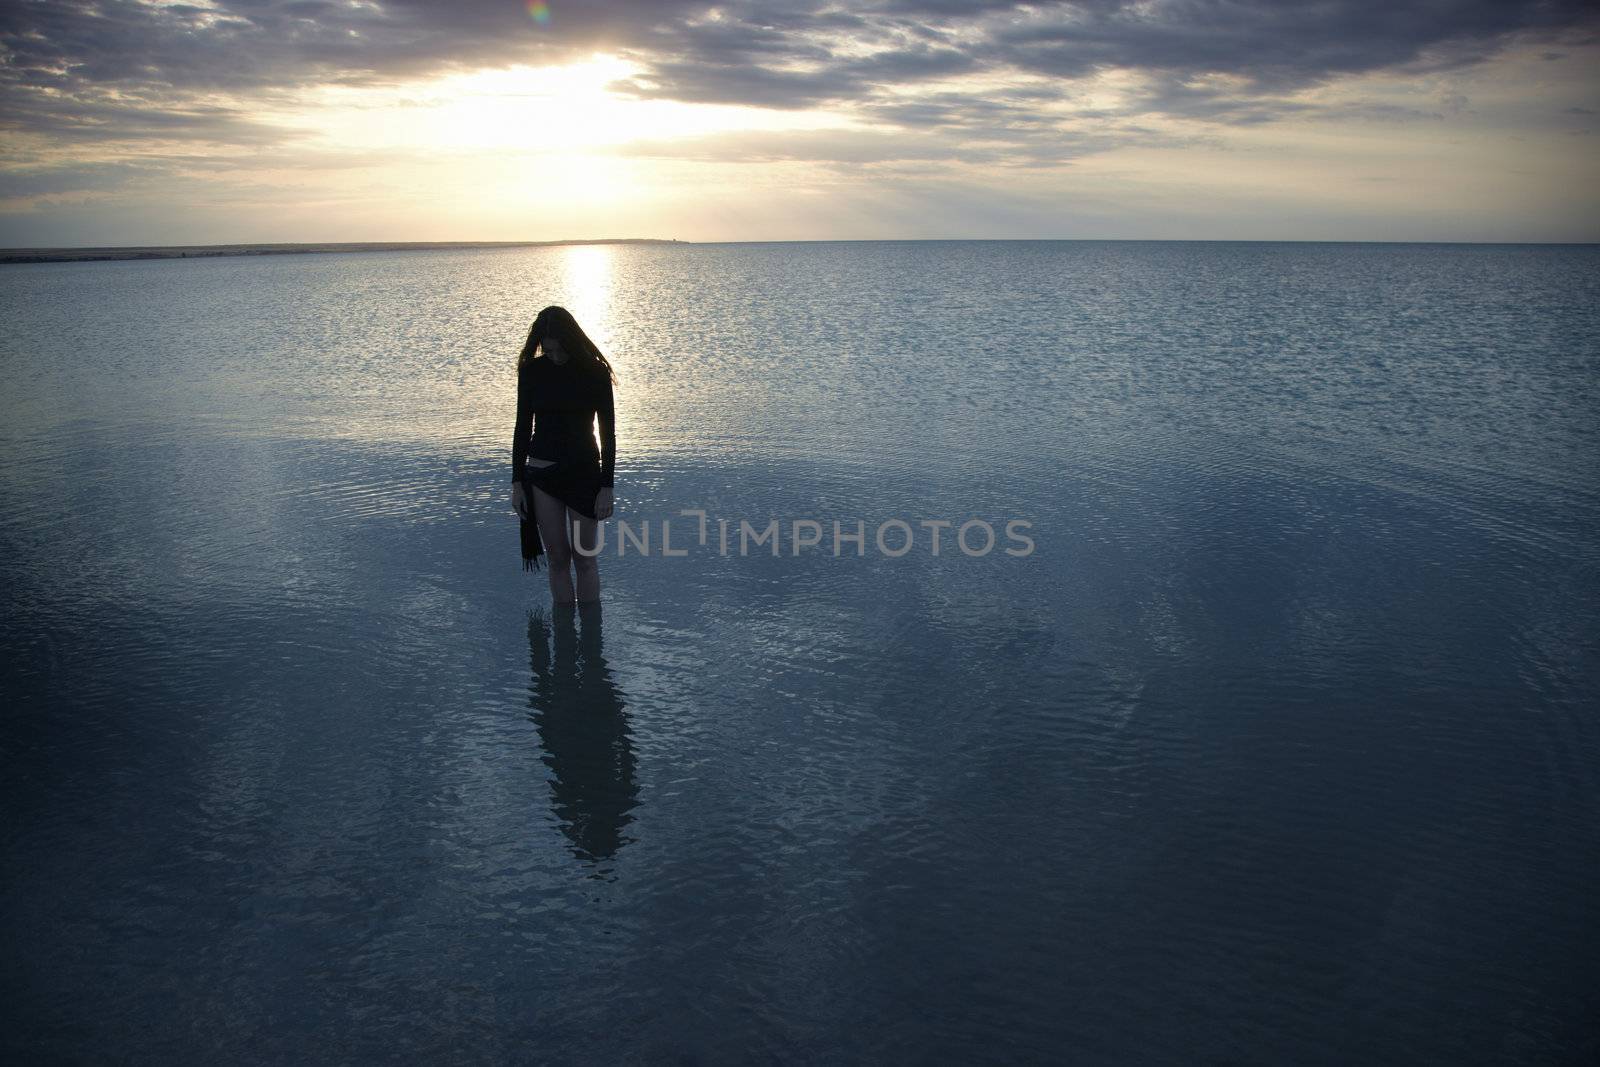 Silhouette of the single sad woman standing in the sea during sunset. Artistic colors and darkness added